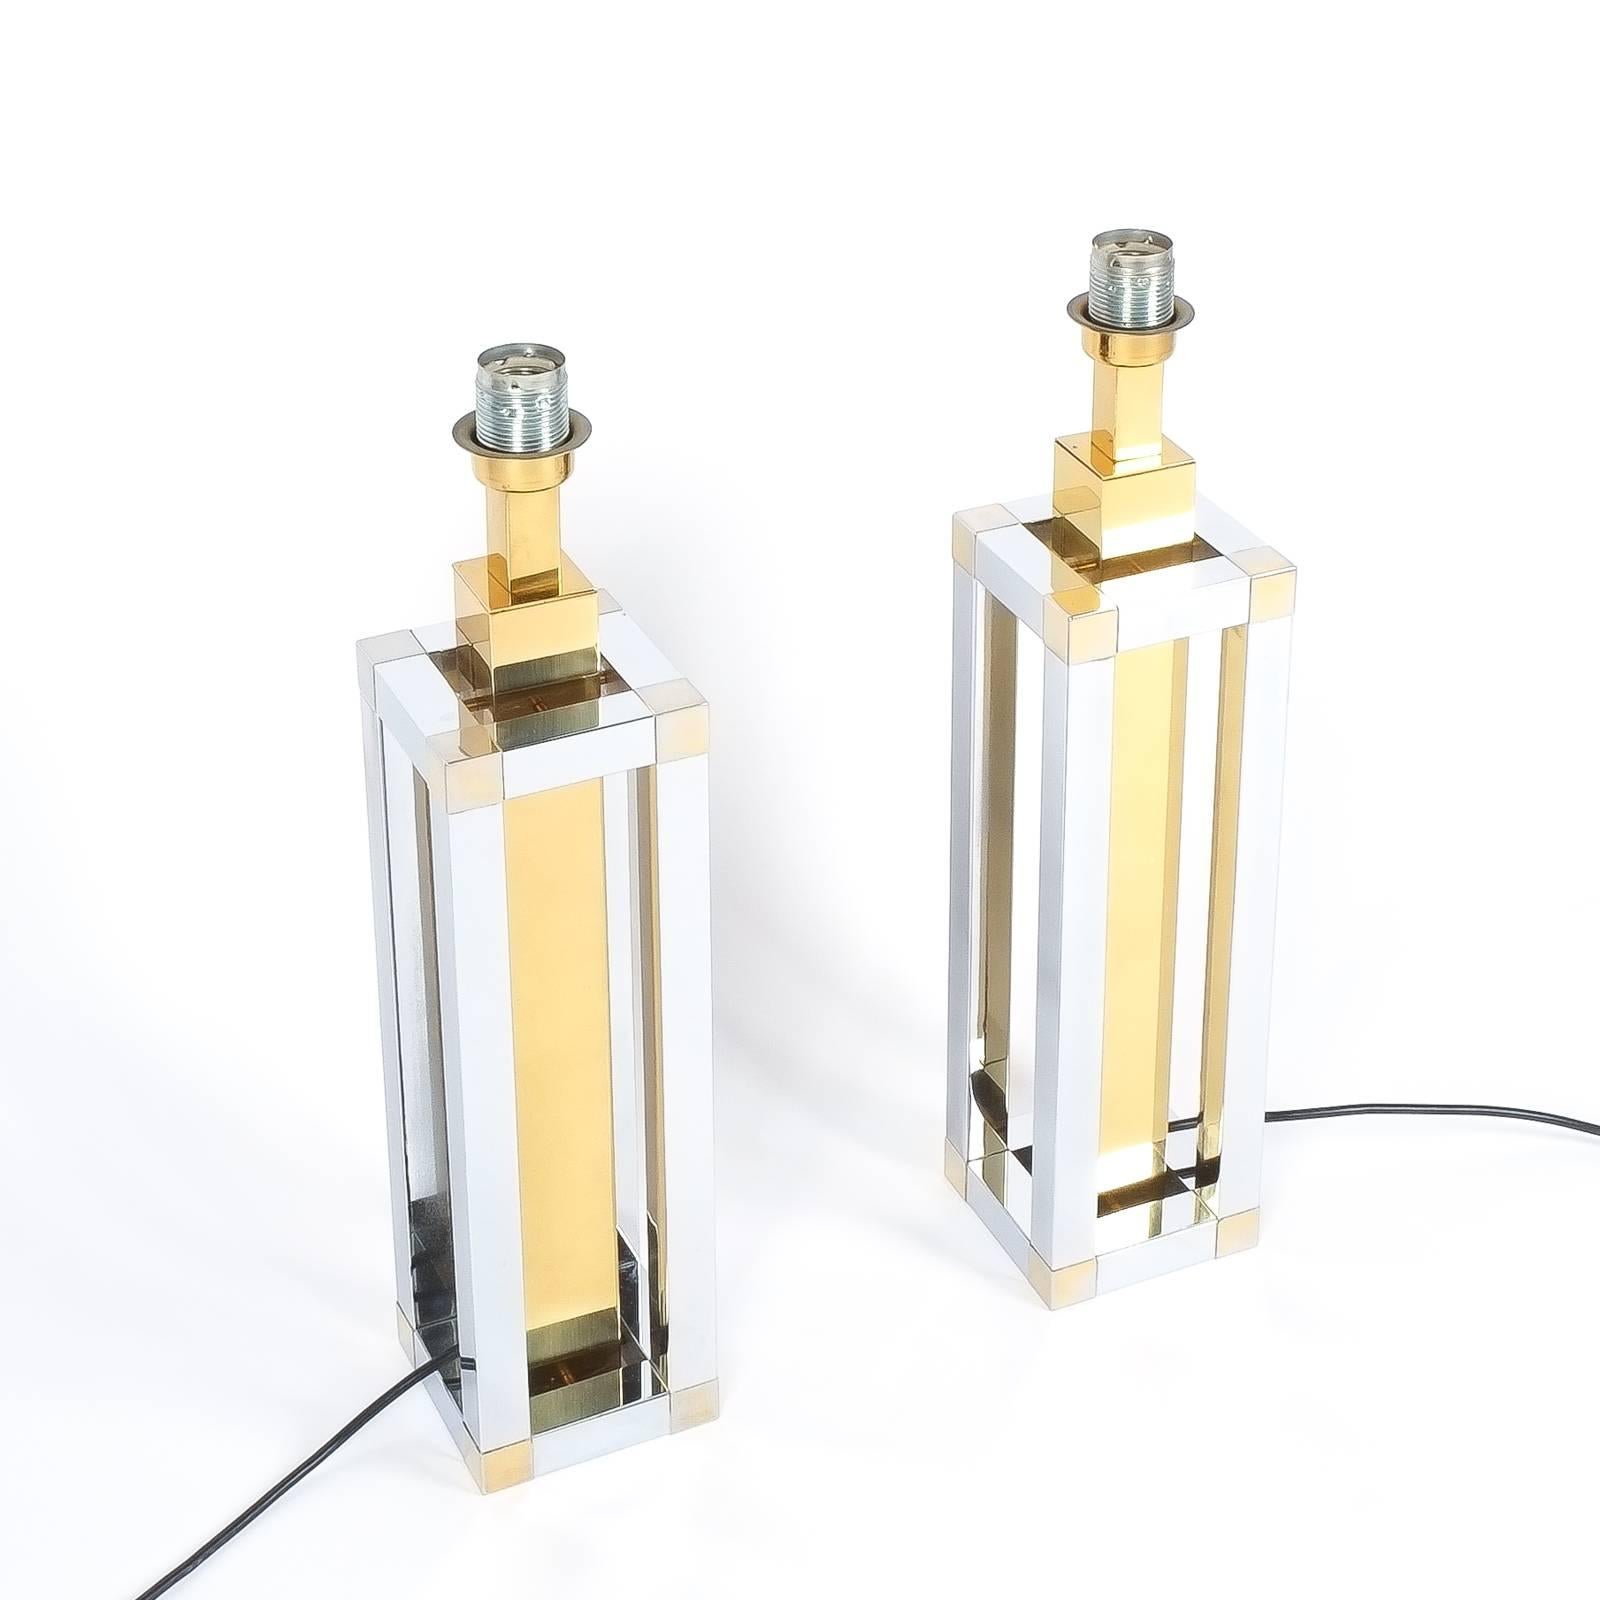 Romeo Rega Chrome and Brass Table Lamps, Italy circa 1970 For Sale 2